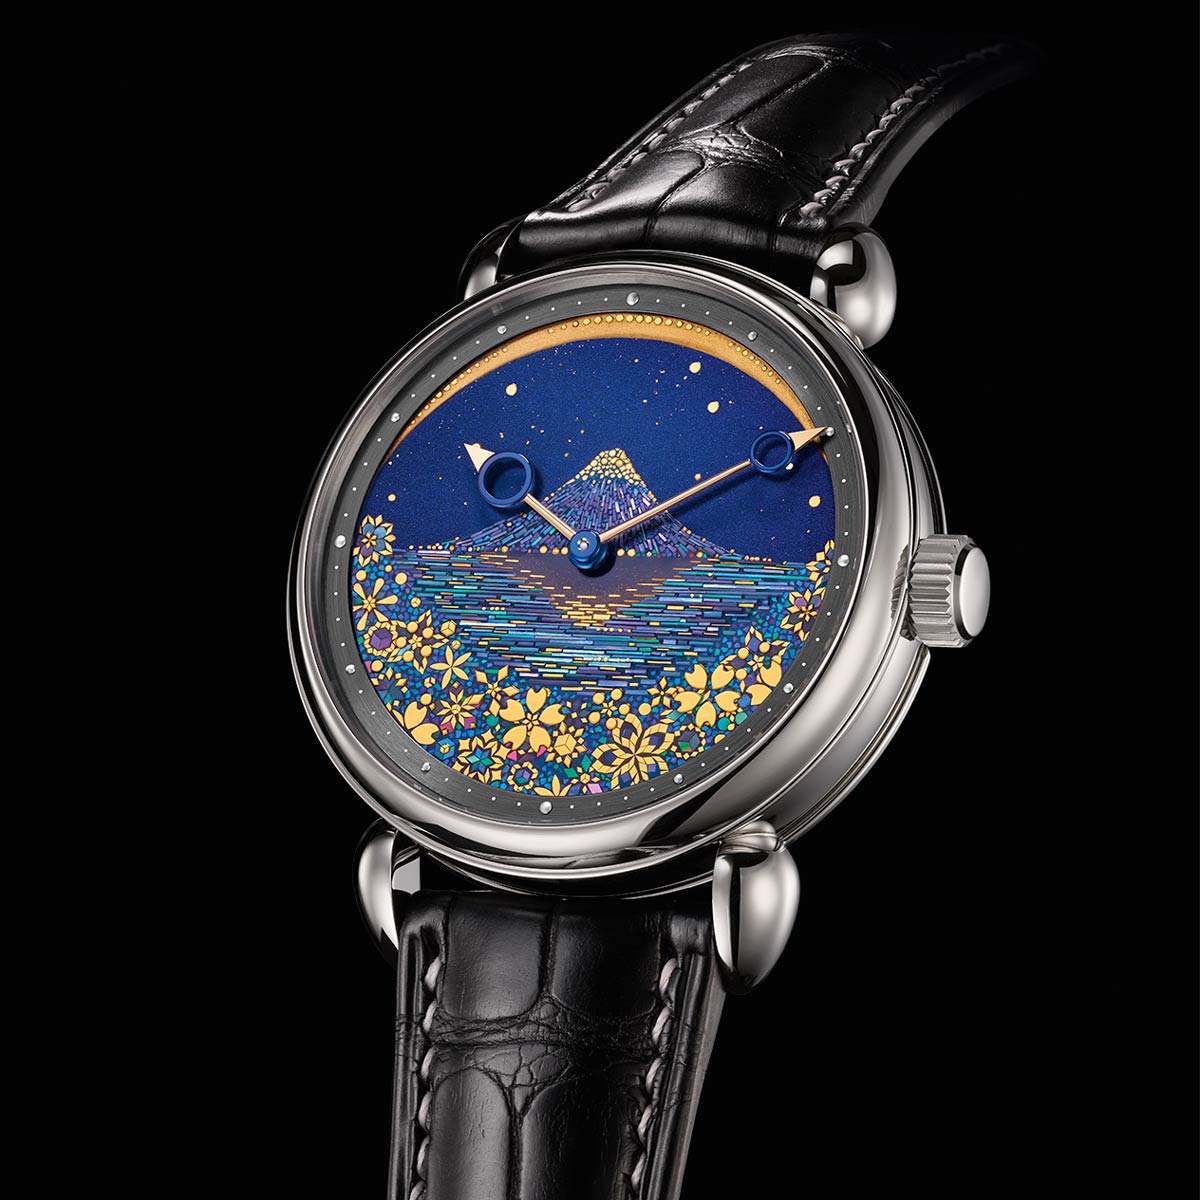 The Voutilainen Vingt 8 Setsu-Getsu-Ka Unique New Art Piece by master watchmaker Kari Voutilainen with a special dial made by legendary Japanese lacquer artist Tatsuo Kitamura